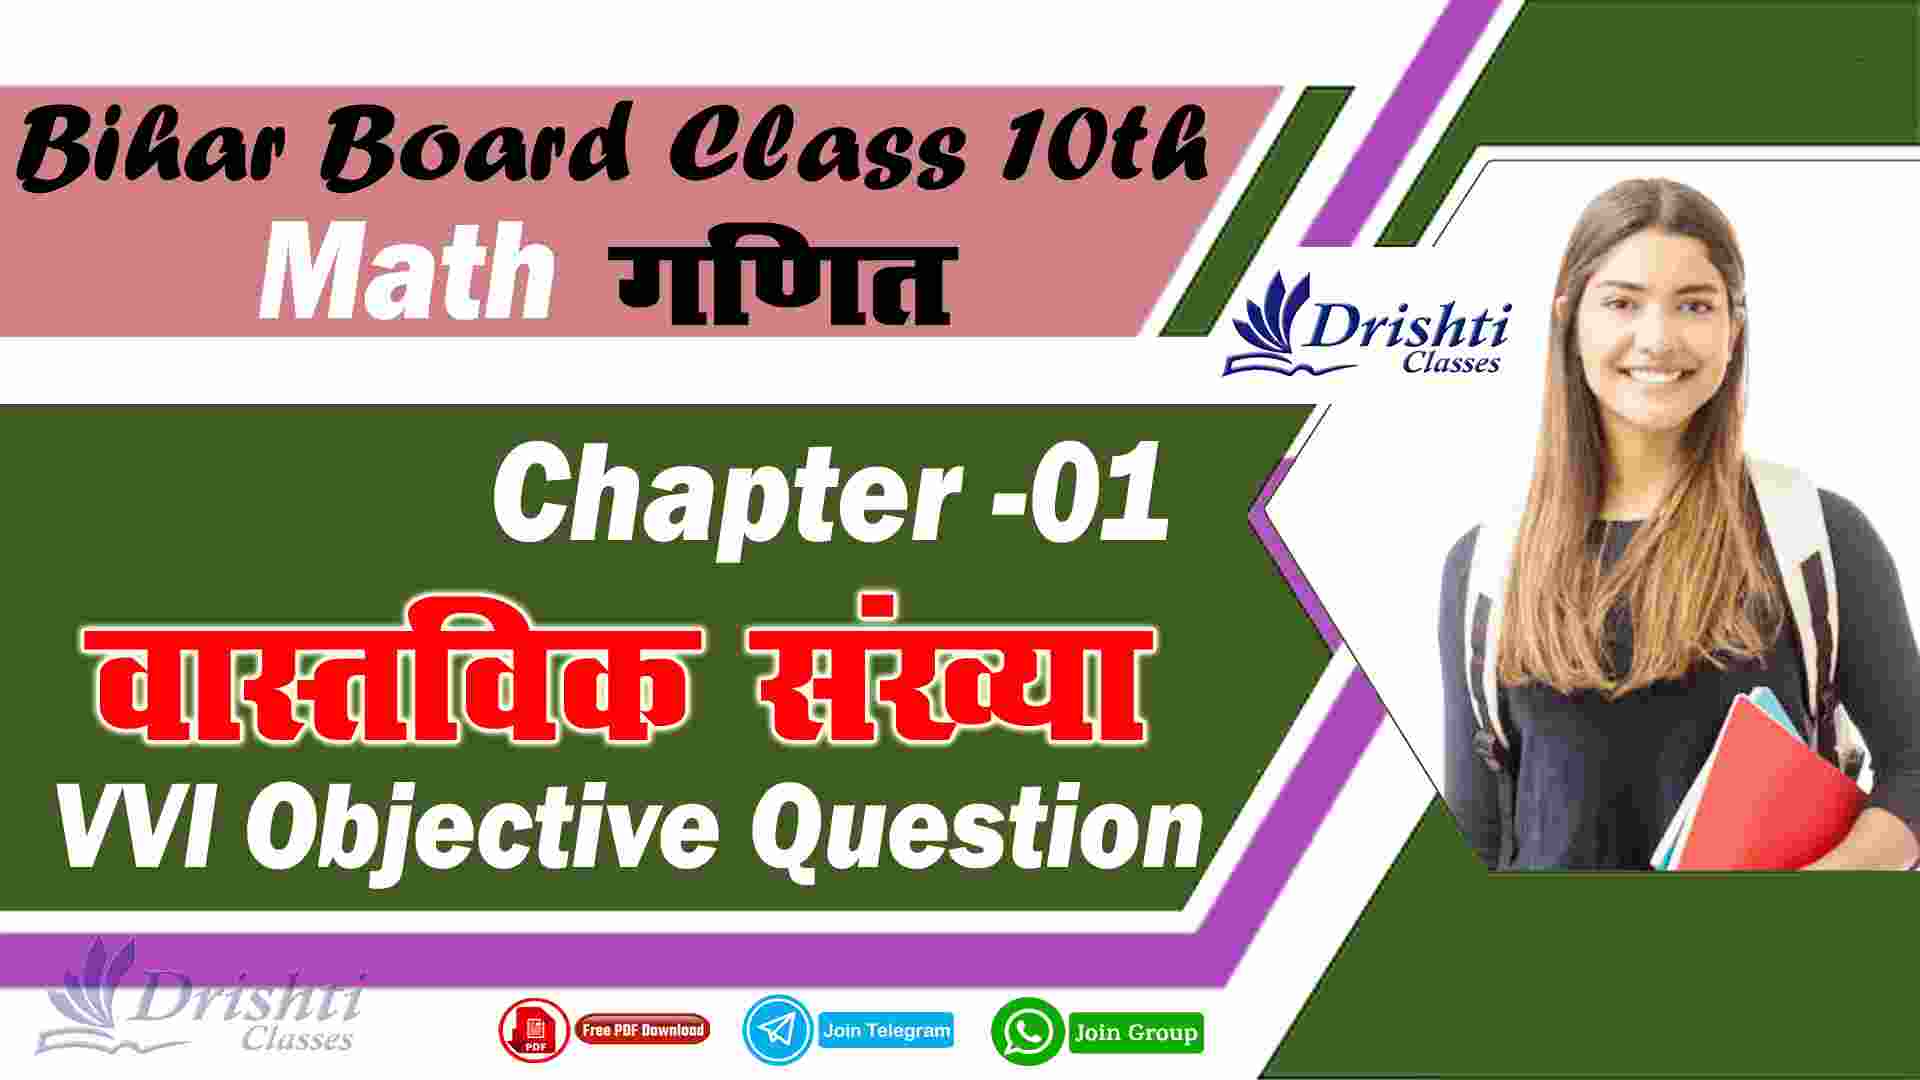 Class 10th Real Numbers VVI Objective Questions, Class 10 Maths Chapter 1 pdf In Hindi, Class 10th Mmath Chapter 1 VVI Objective Question Answer, Class 10th math Objective Question